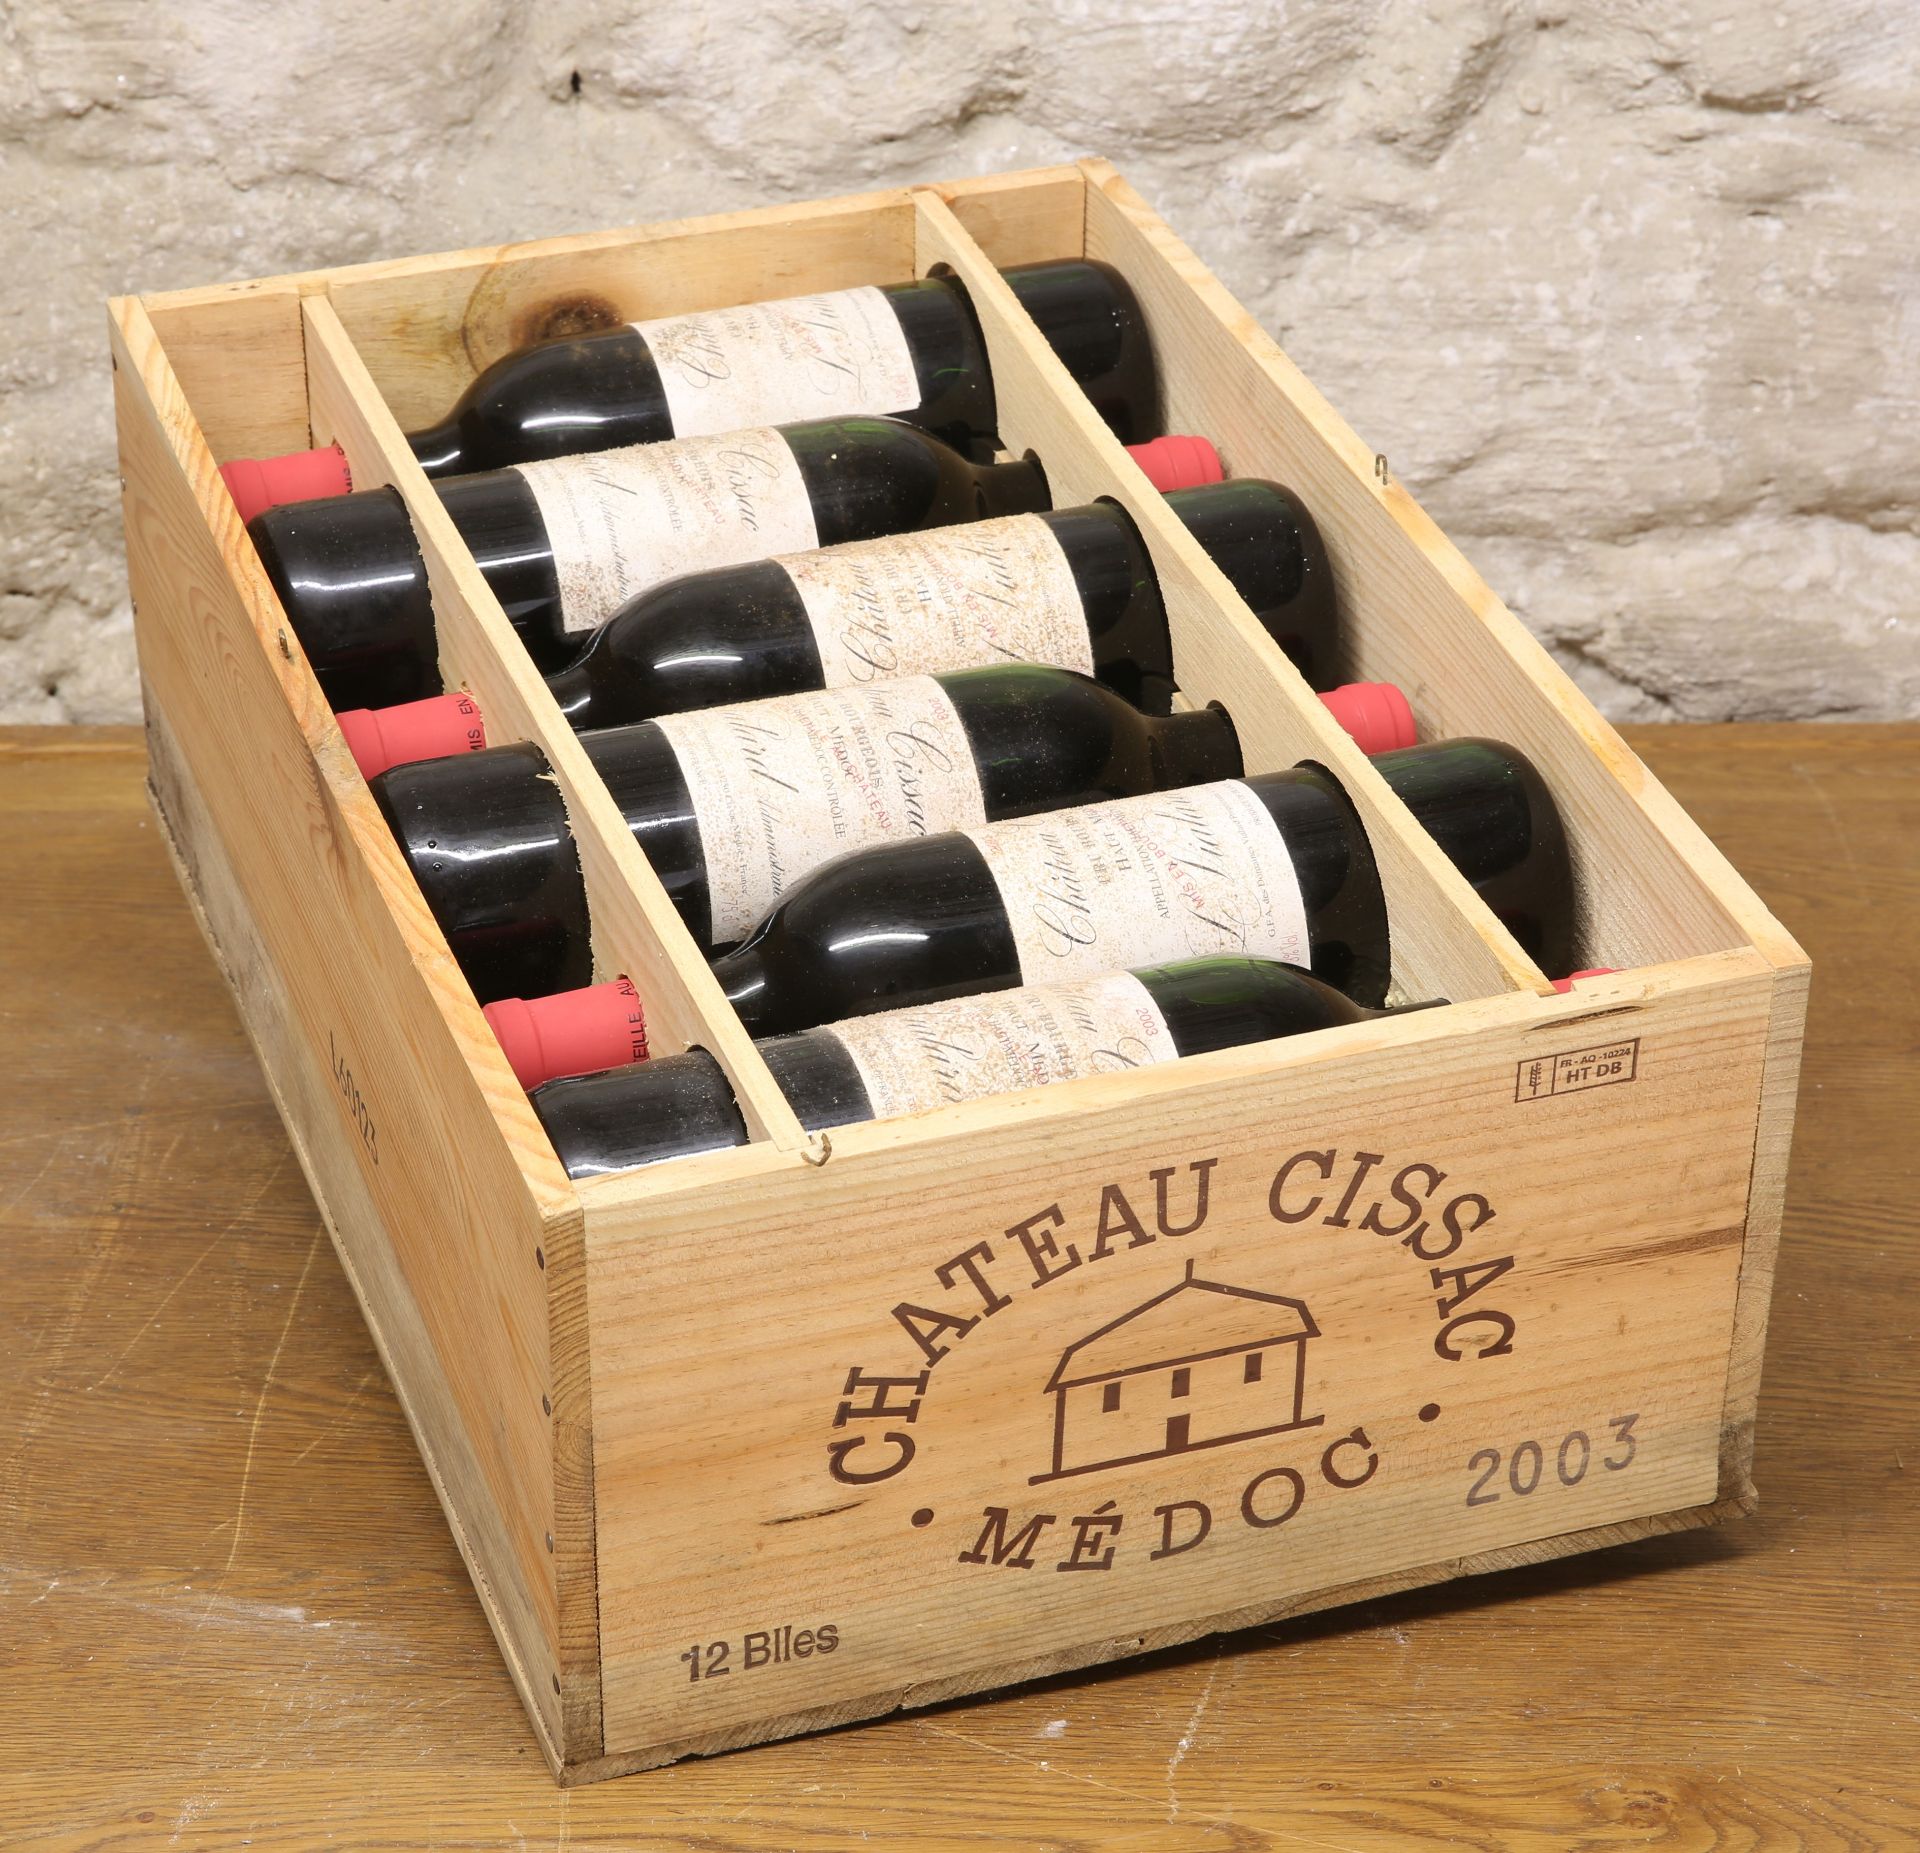 12 BOTTLES (IN OWC) CHATEAU CISSAC CRU BOURGEOIS MEDOC 2003